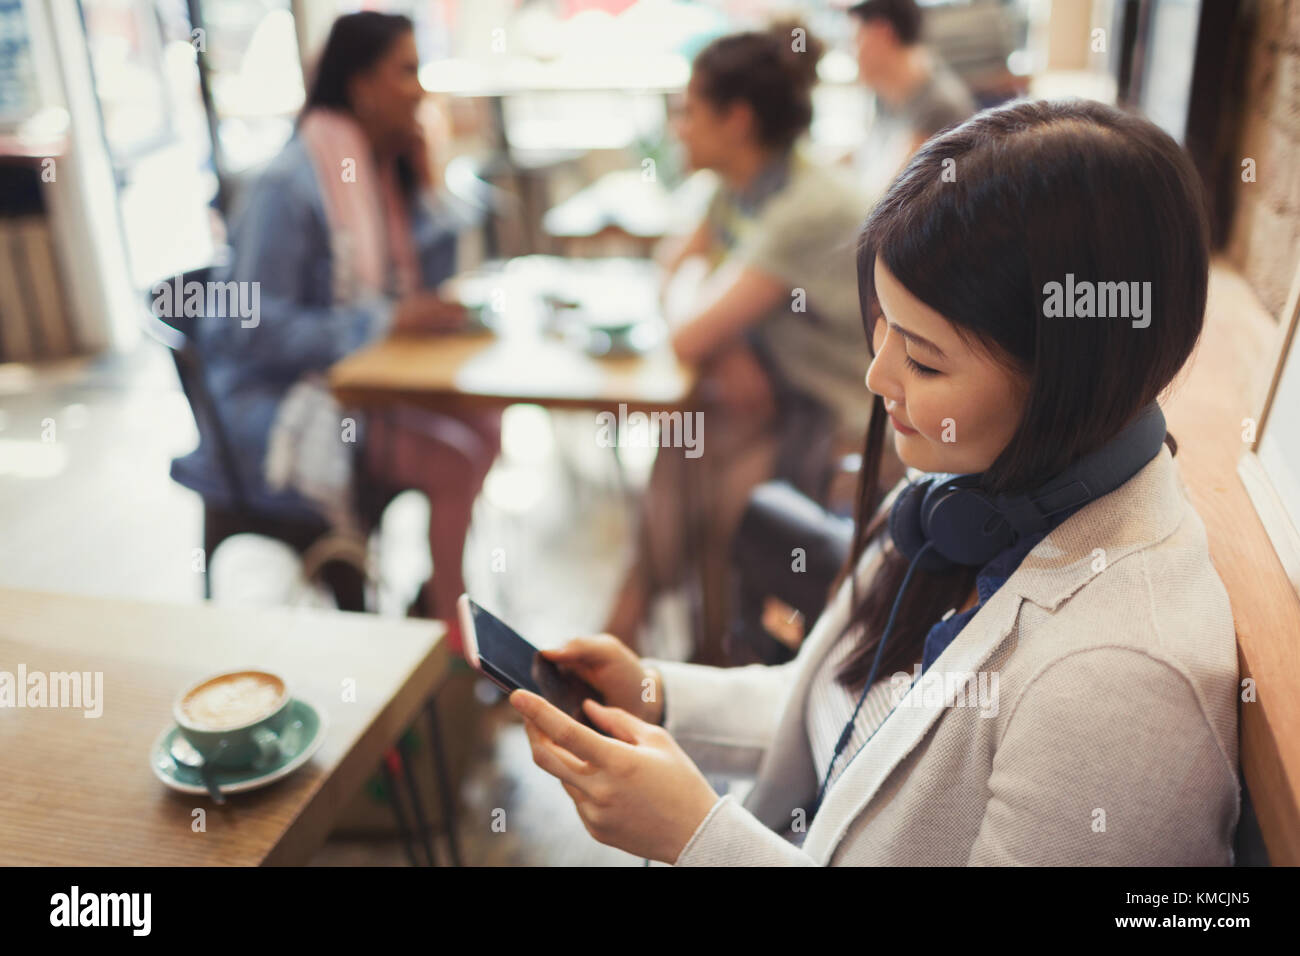 Young woman with headphones texting with cell phone and drinking coffee at cafe table Stock Photo